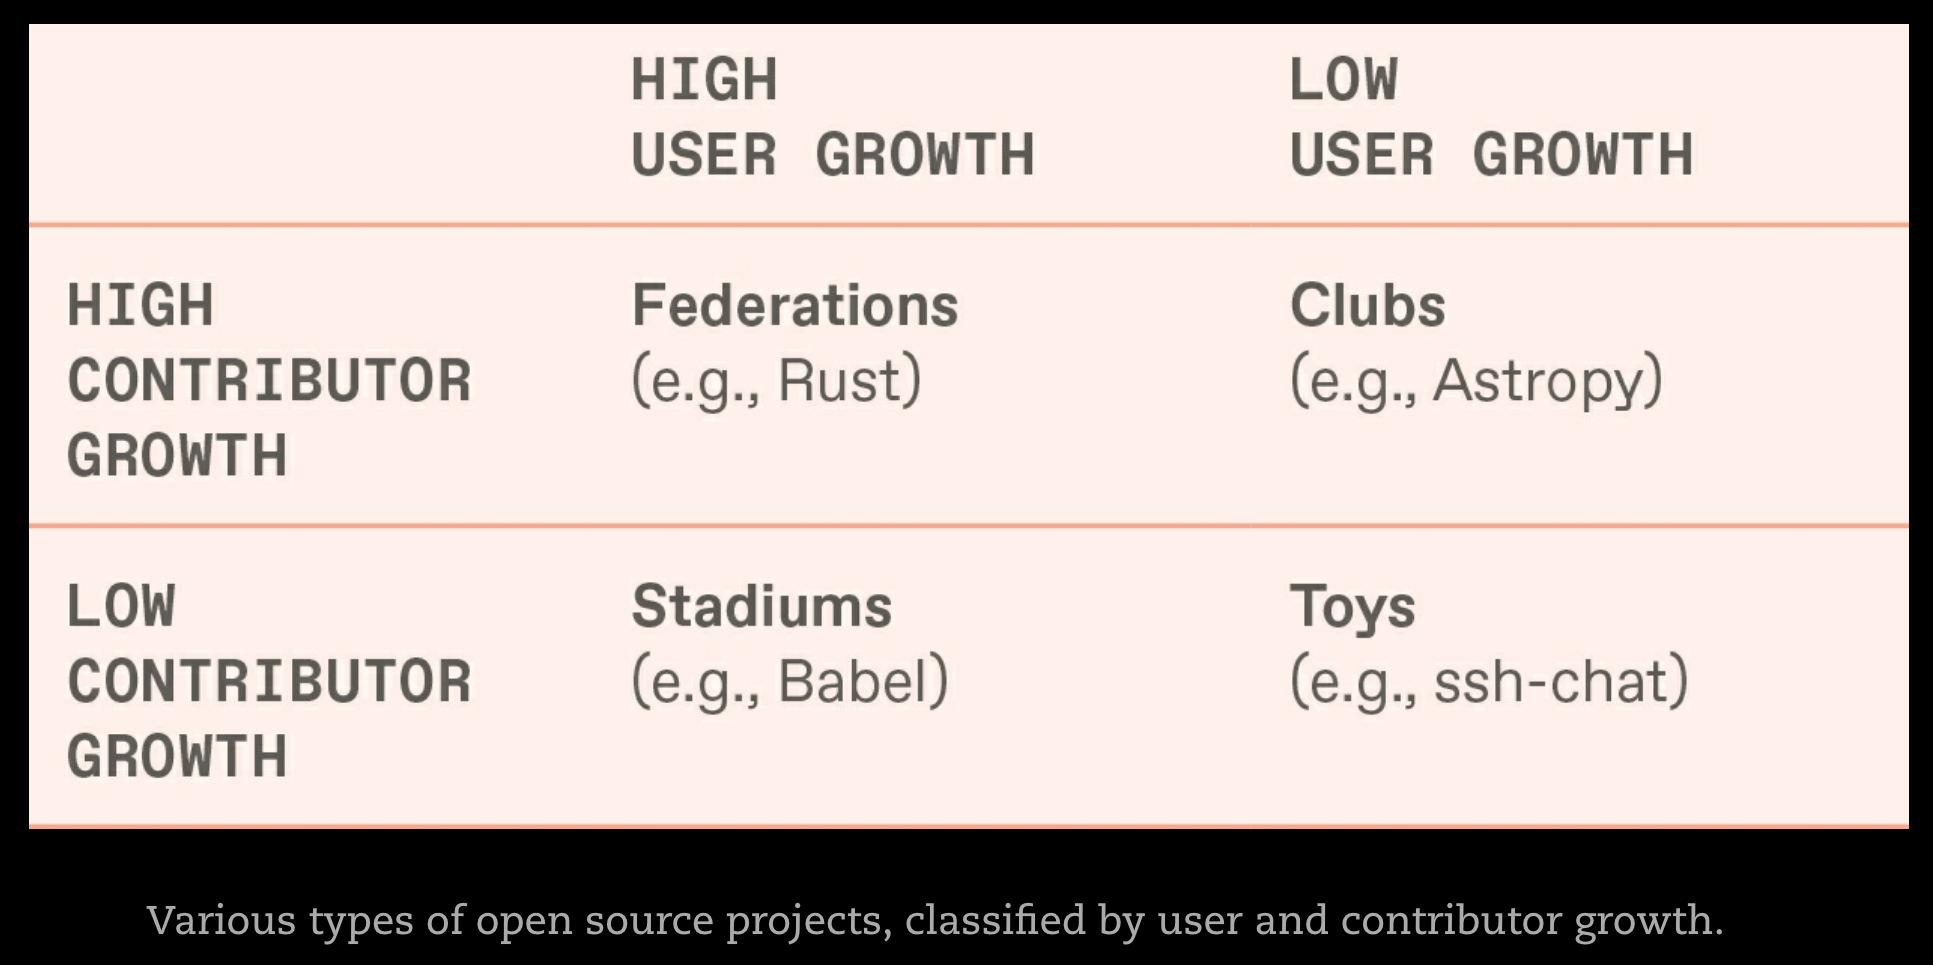 Graphic comparing toys, clubs, stadiums, and federations